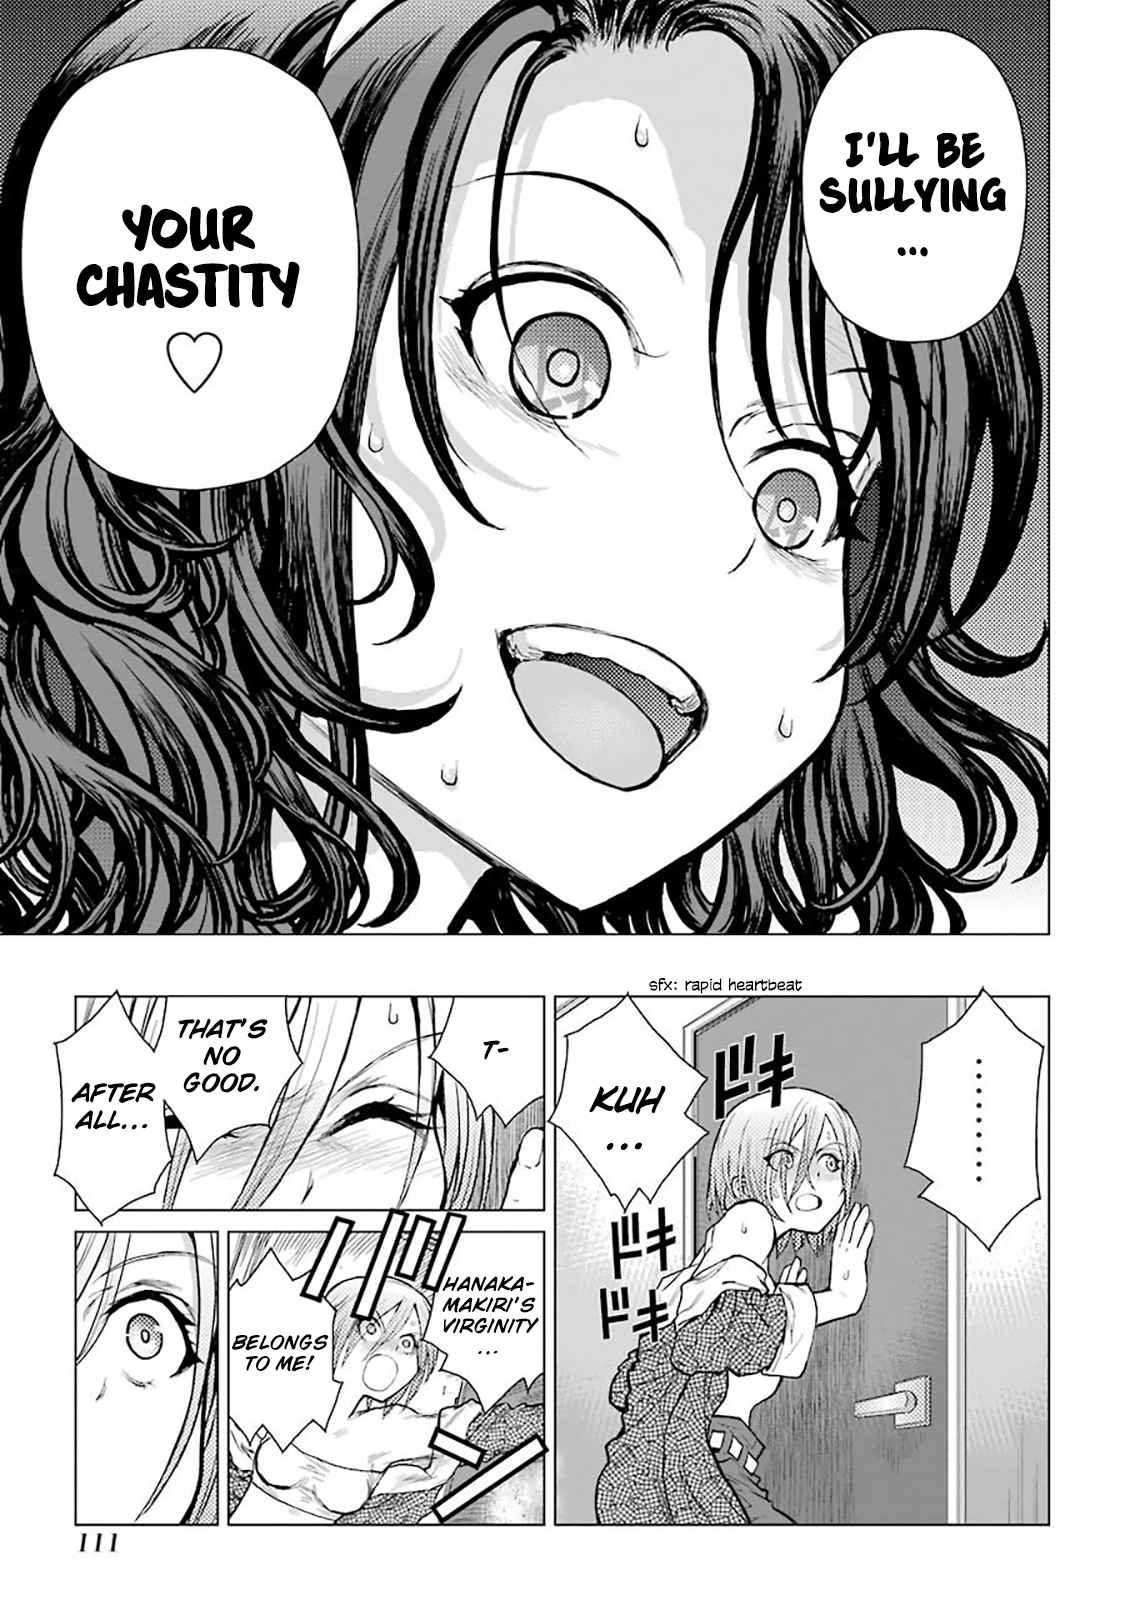 Caterpillar Vol. 8 Ch. 64 I'll Be Sullying Your Chastity ♥